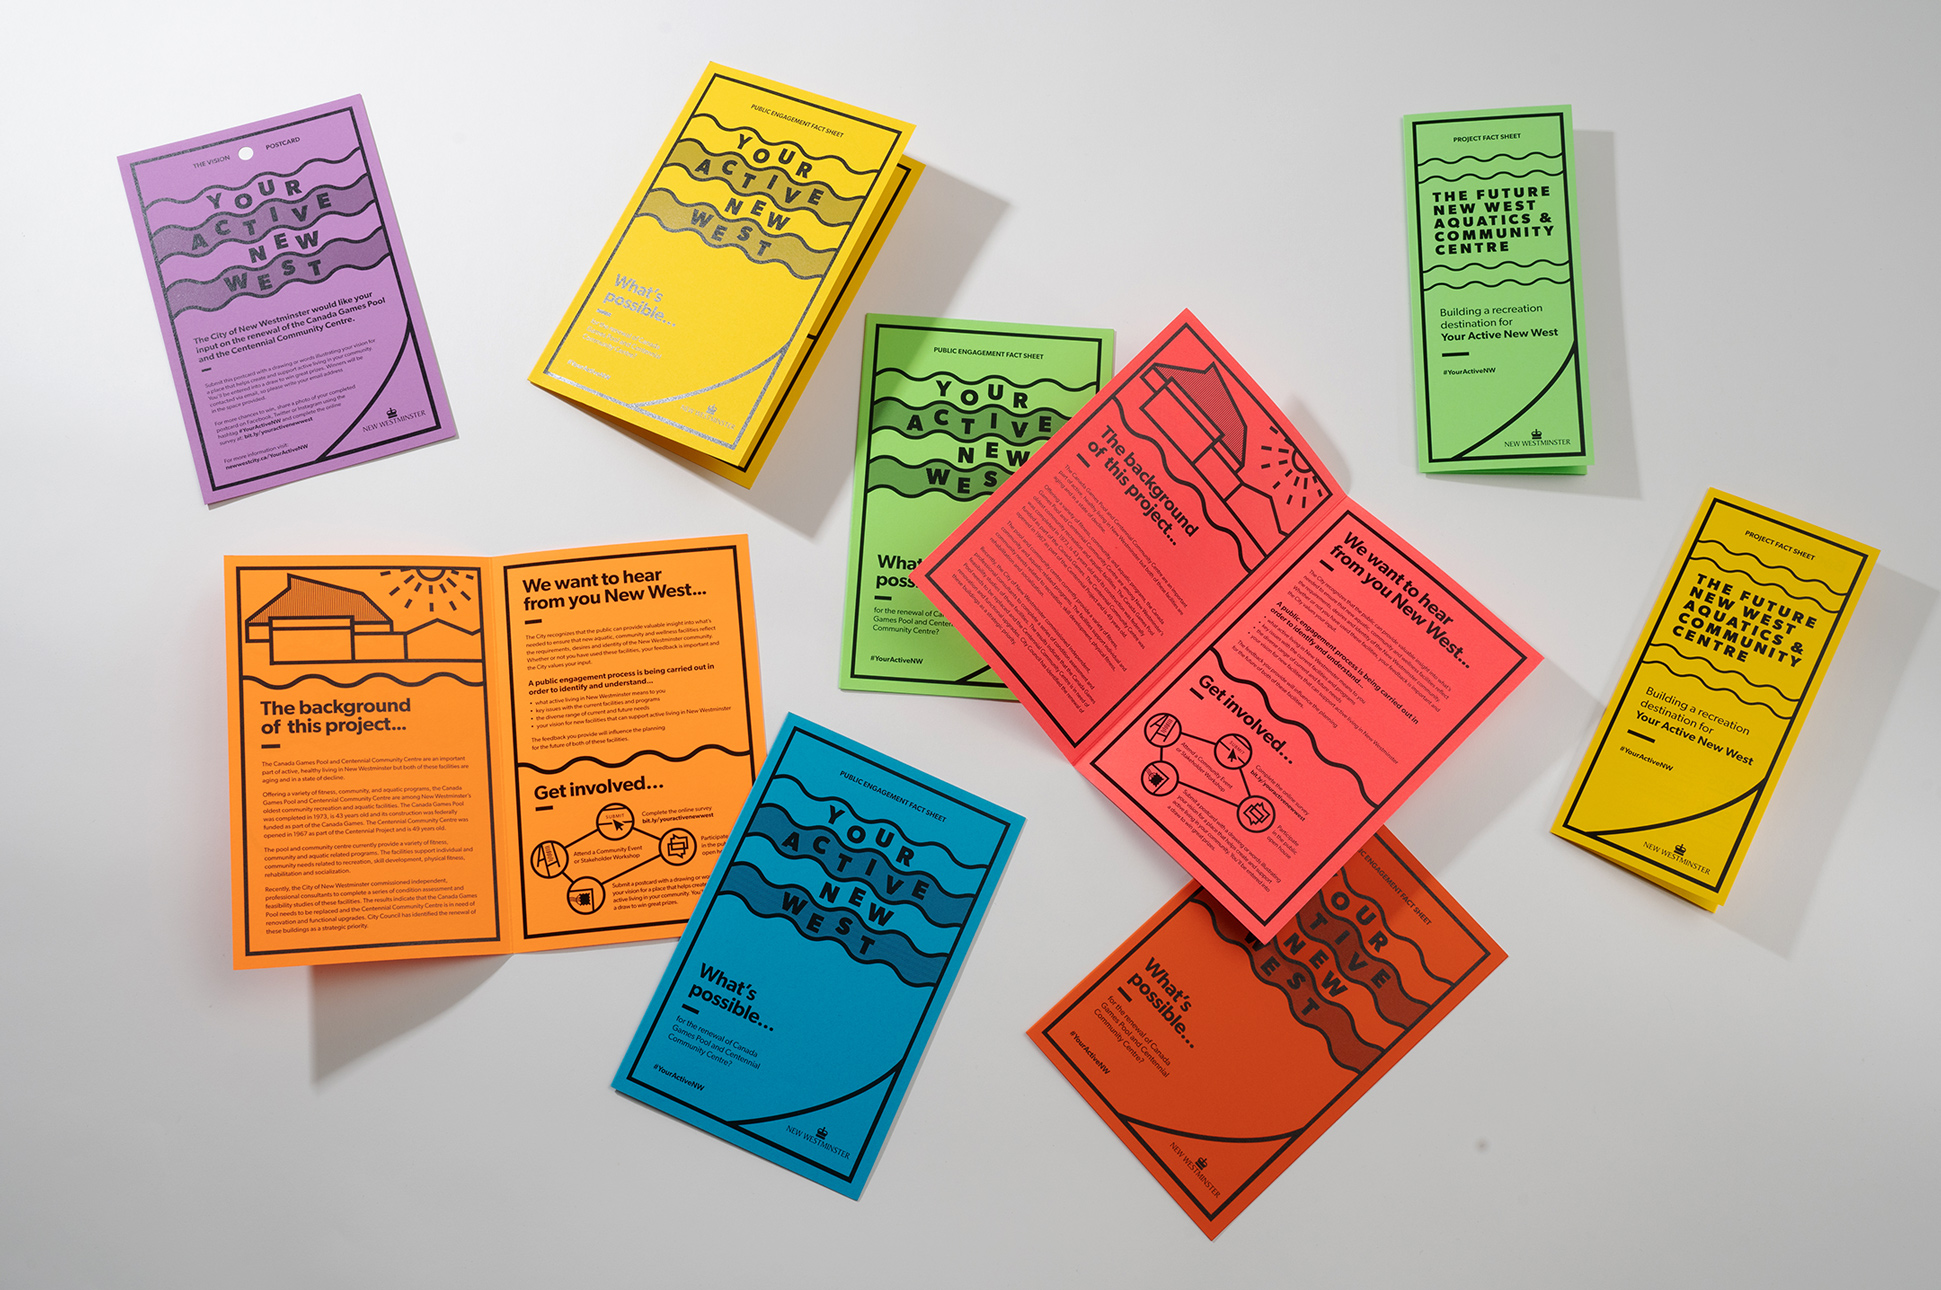 Colourful cards with information about the project on them.